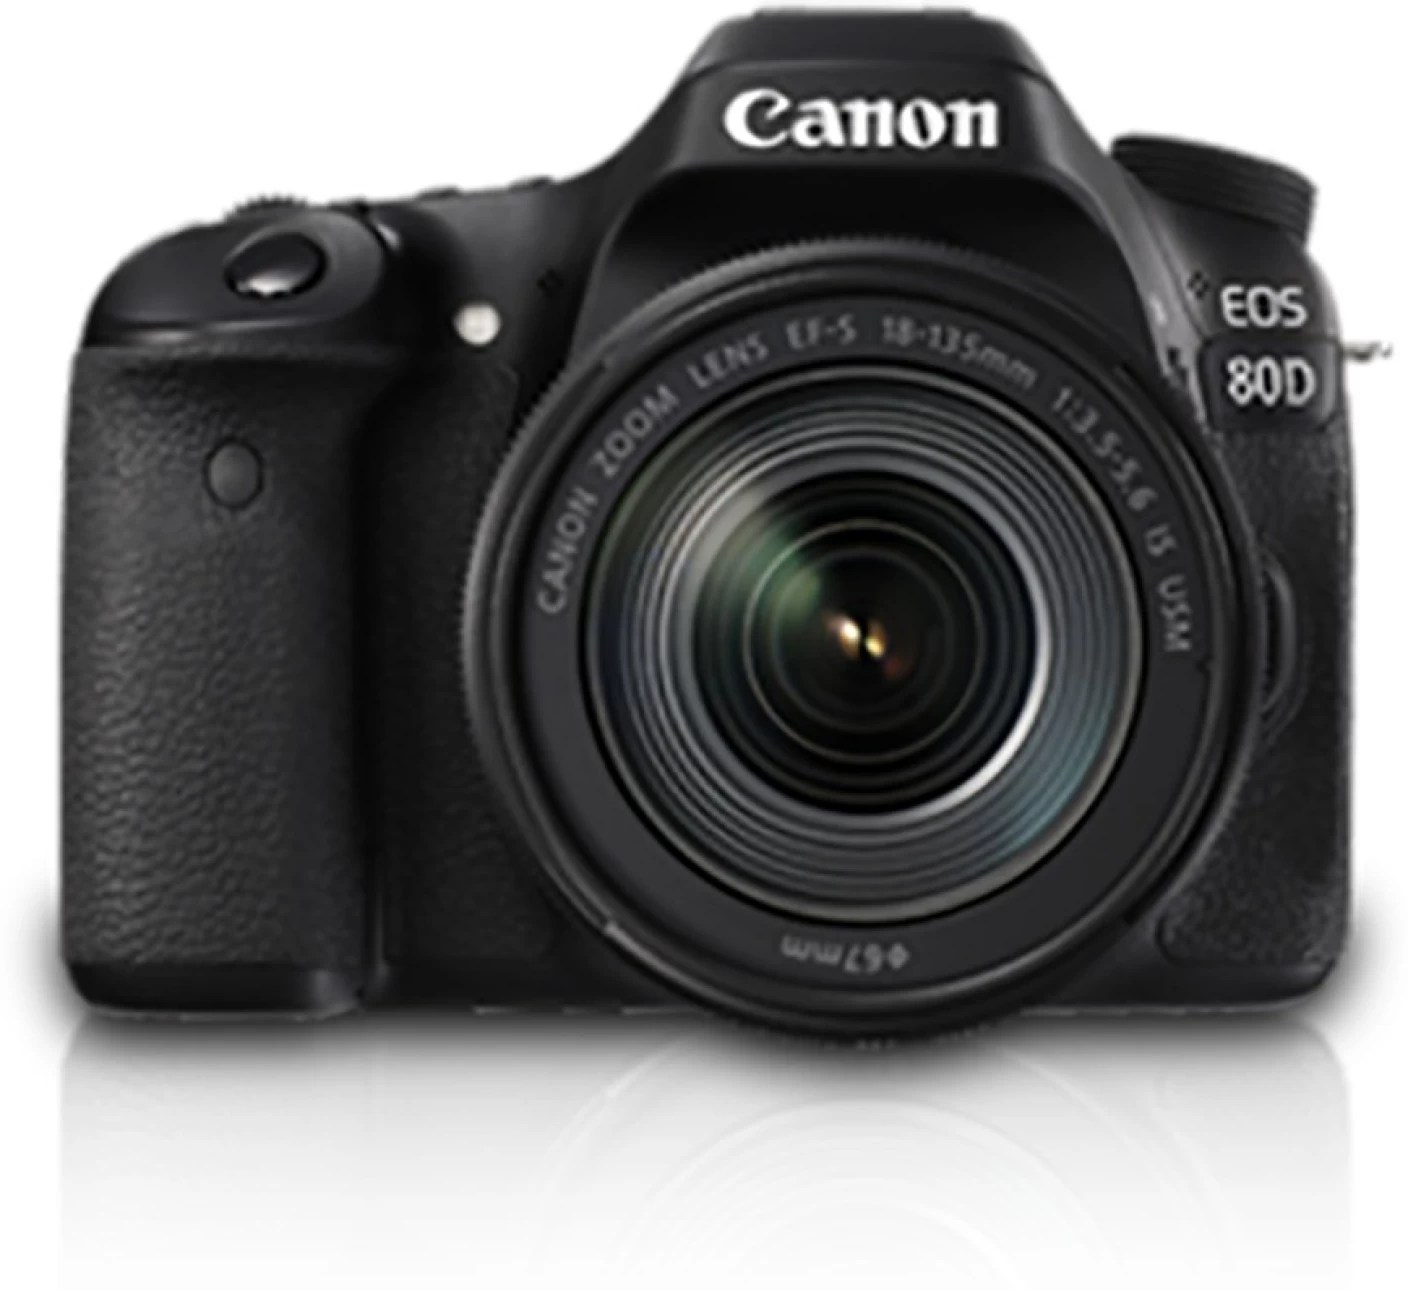 Canon 80D DSLR Camera Body with Single Lens 18135 IS USM